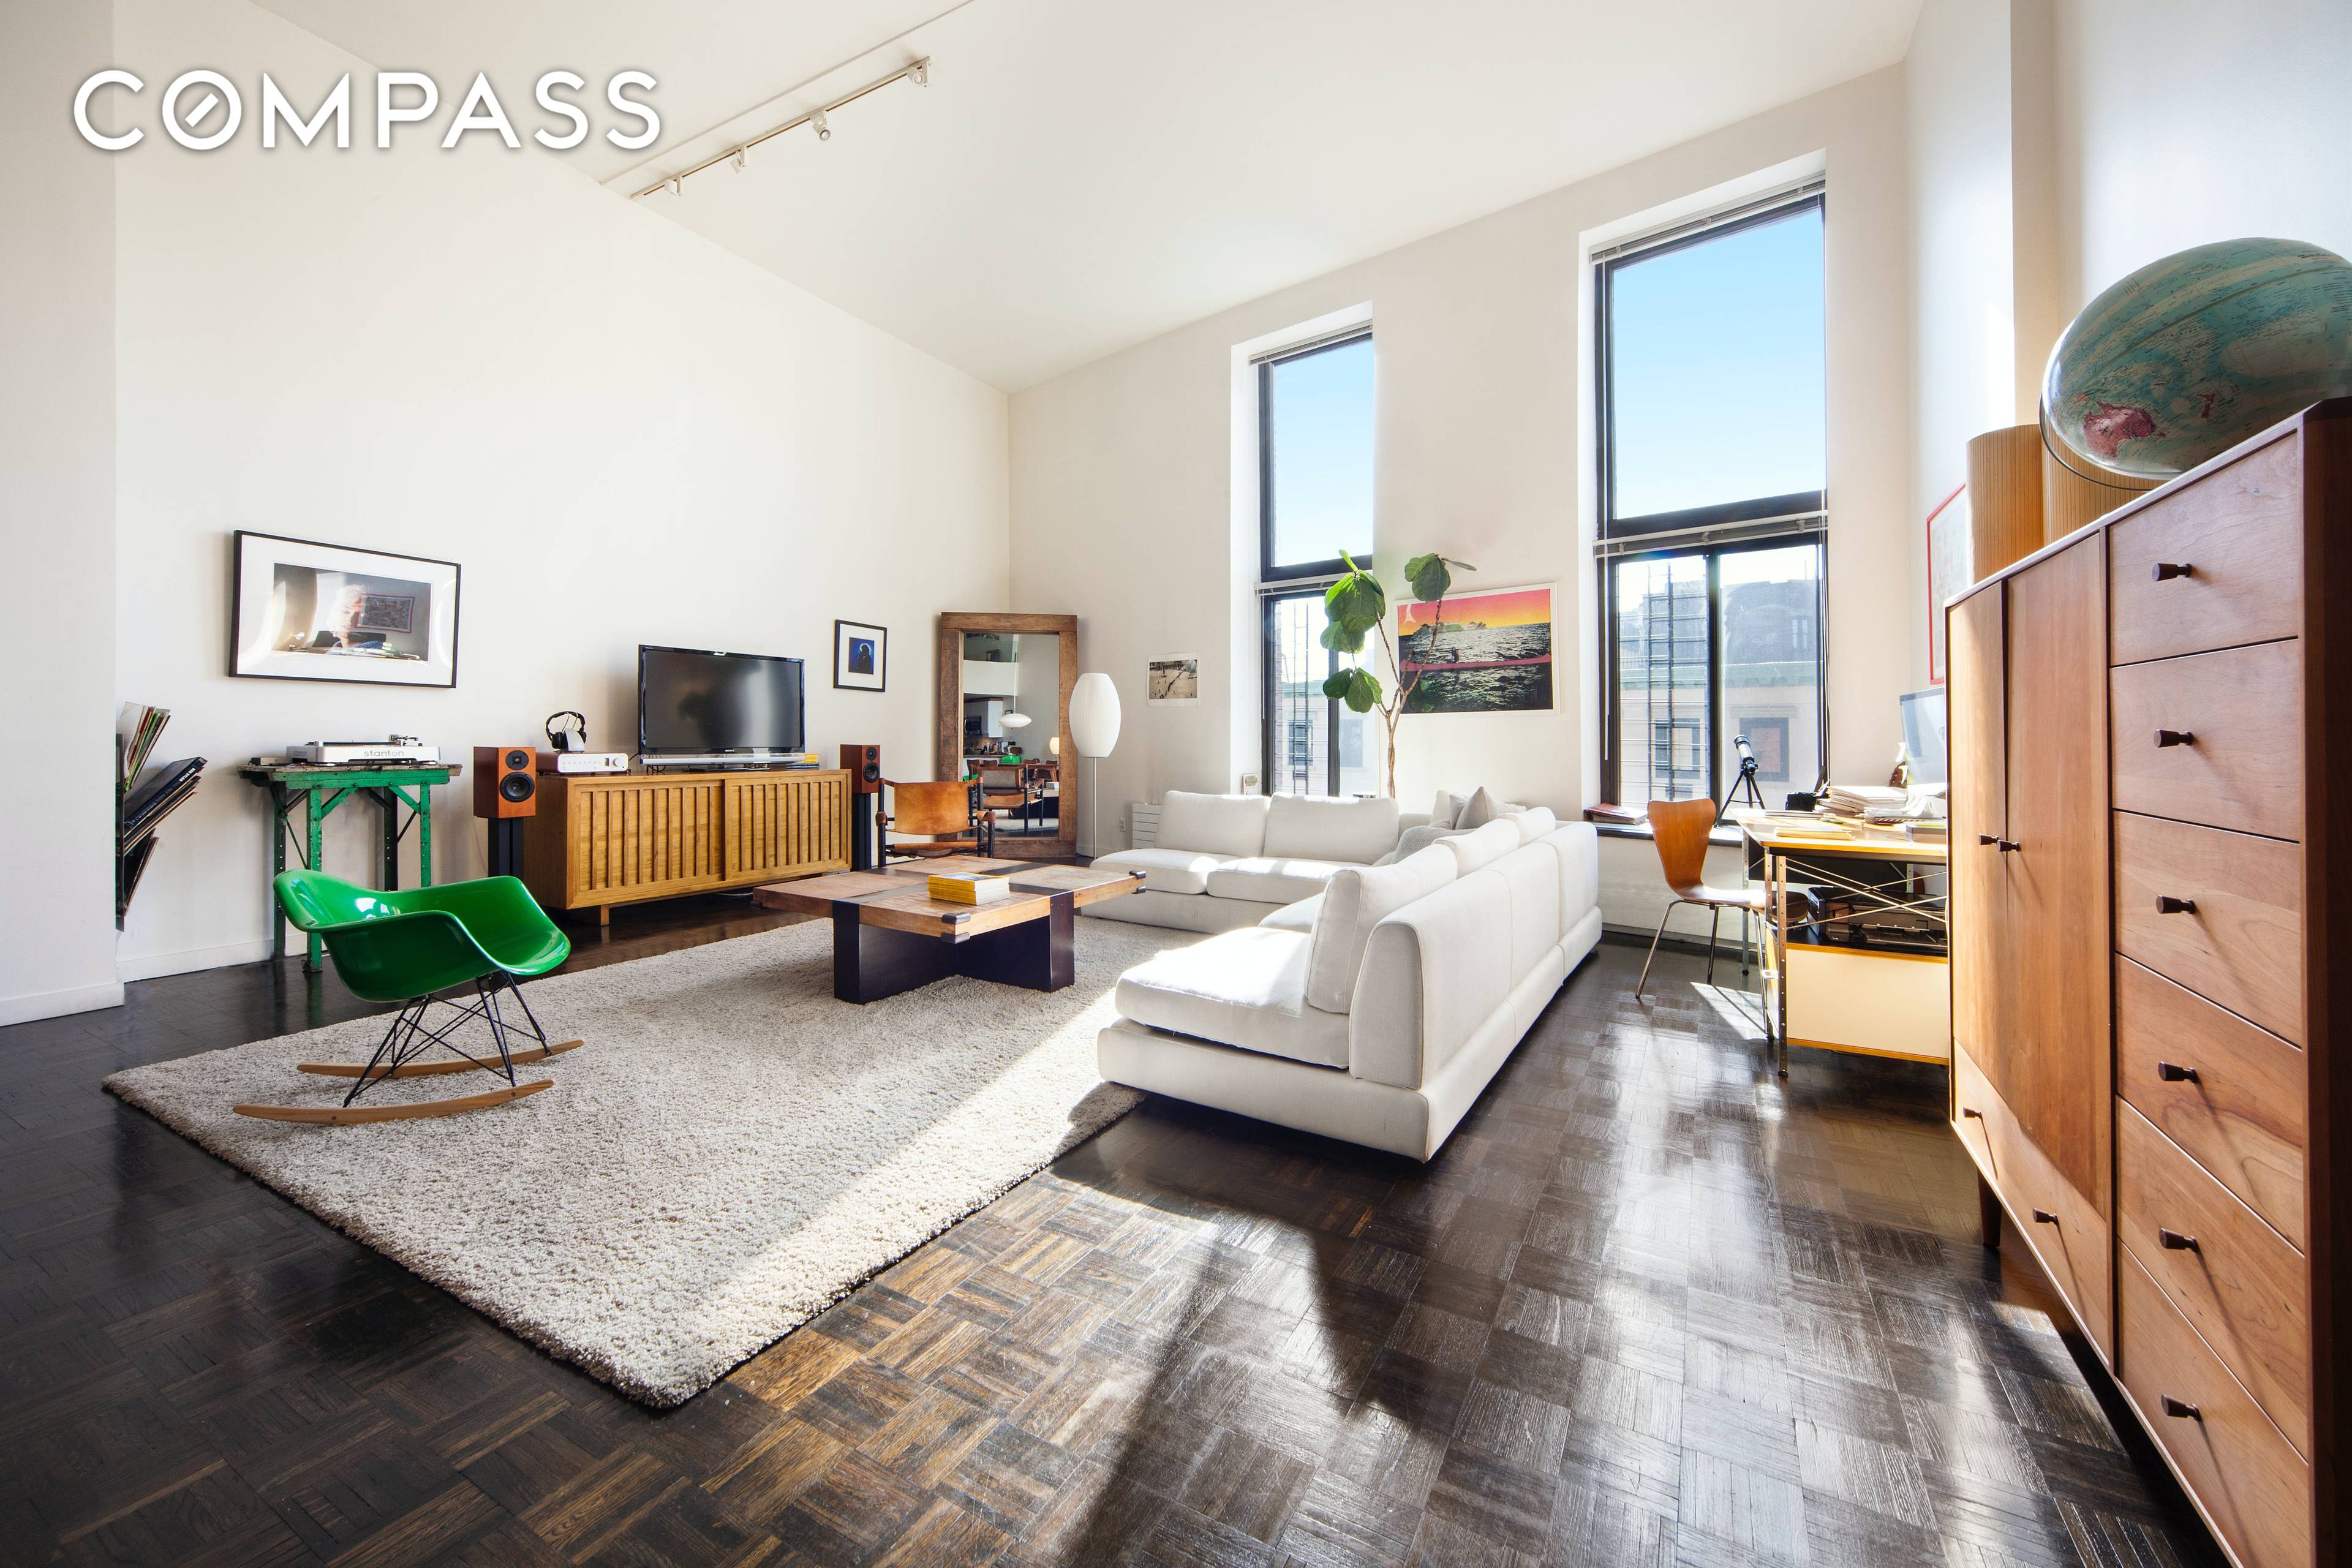 Dramatic ceiling heights and open southern city views draw you in to this 2 bedroom, 2 bathroom Nolita duplex loft.